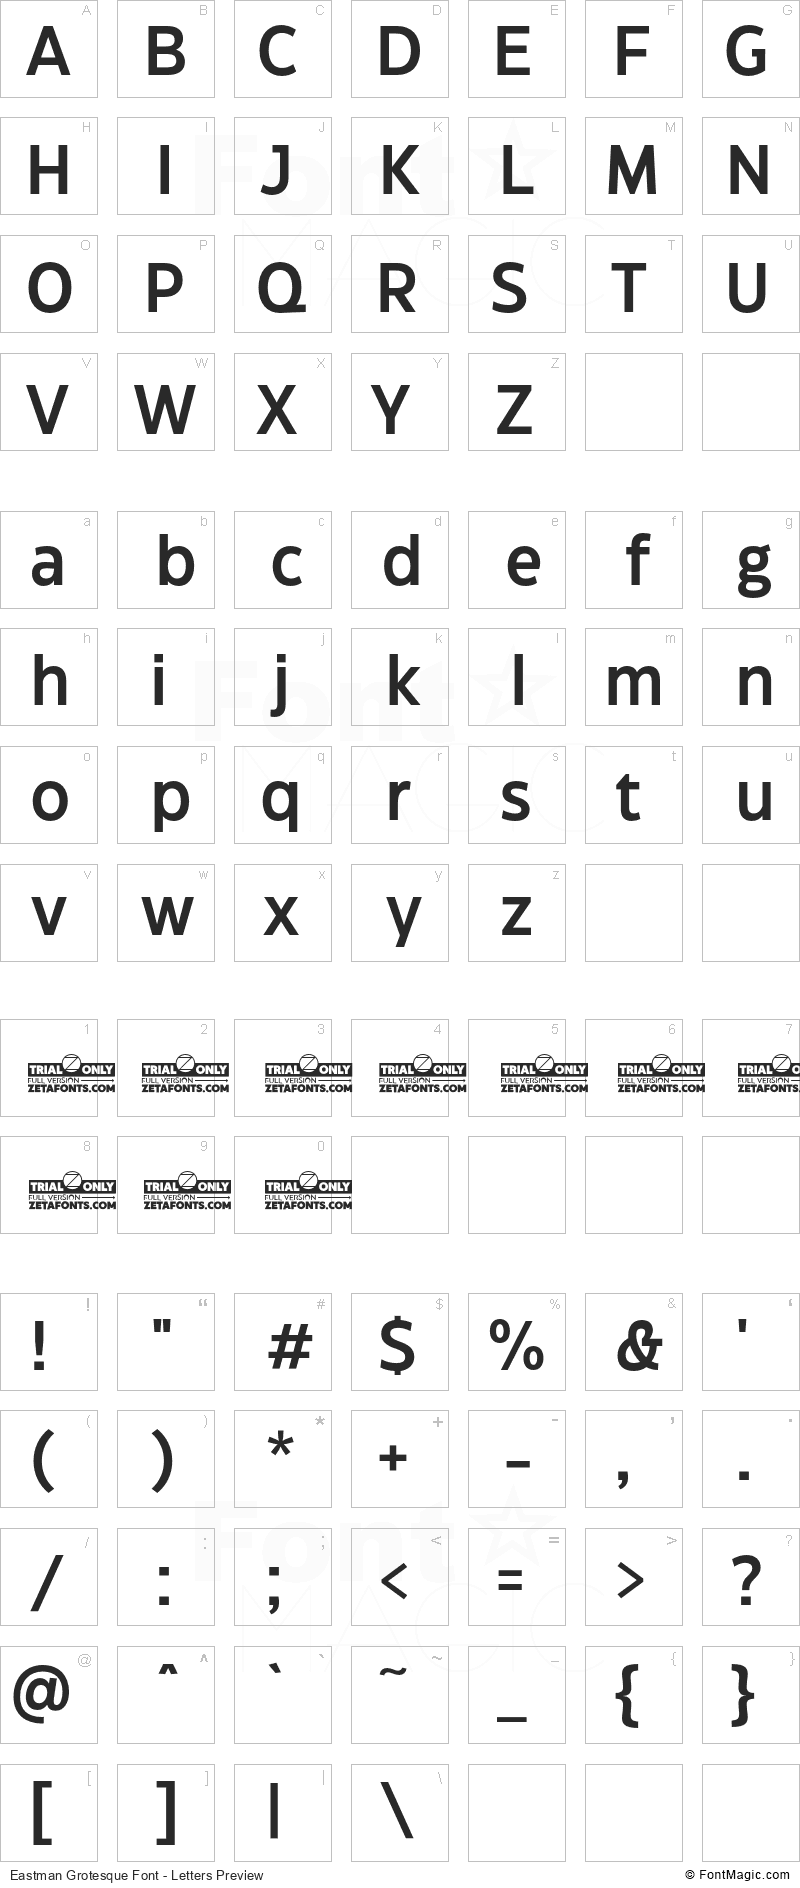 Eastman Grotesque Font - All Latters Preview Chart